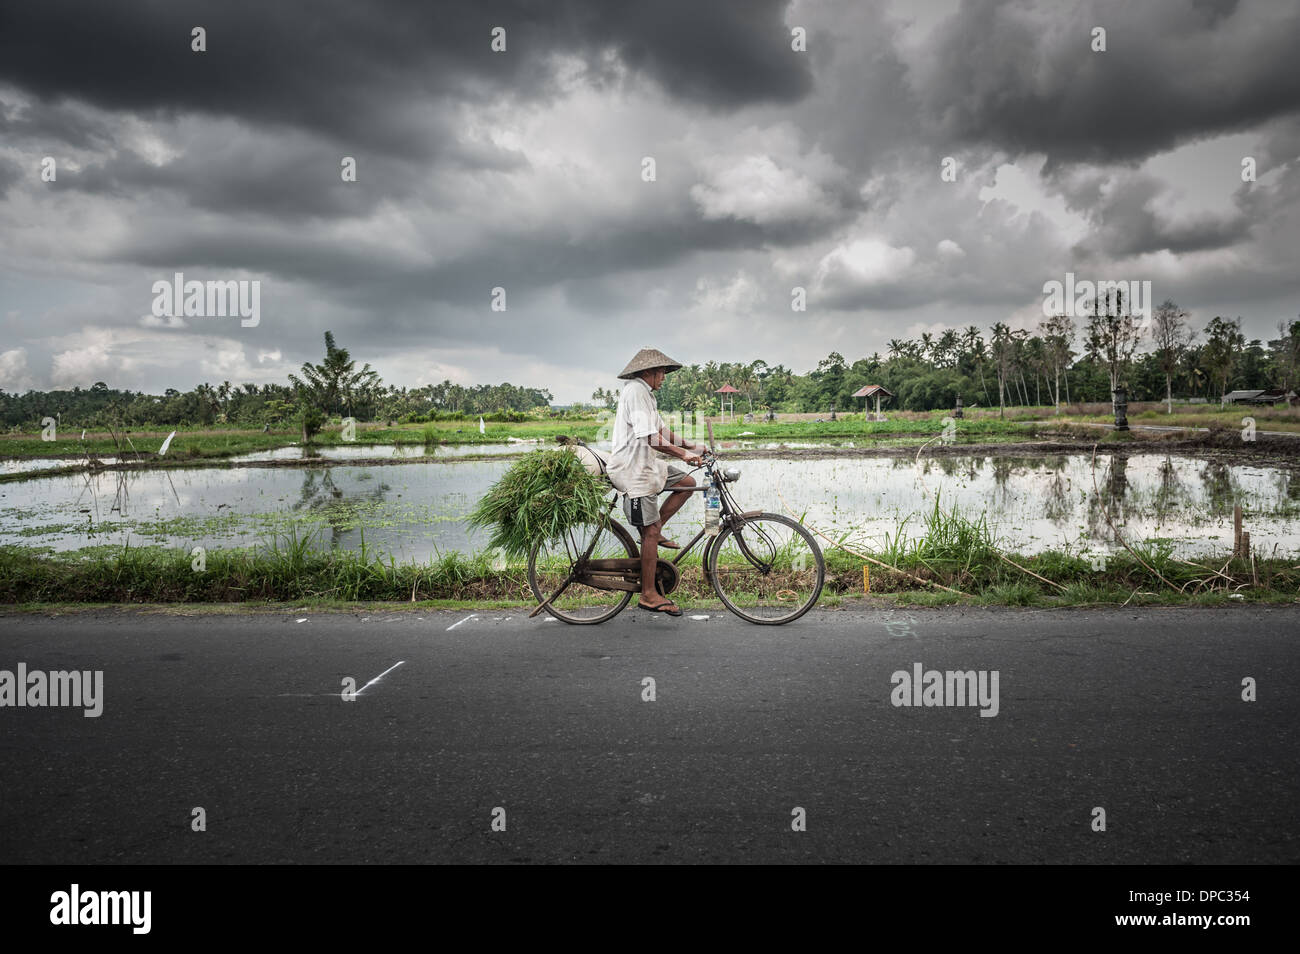 Man riding a bicycle through the rice fields of Bali, Indonesia, Asia. Stock Photo